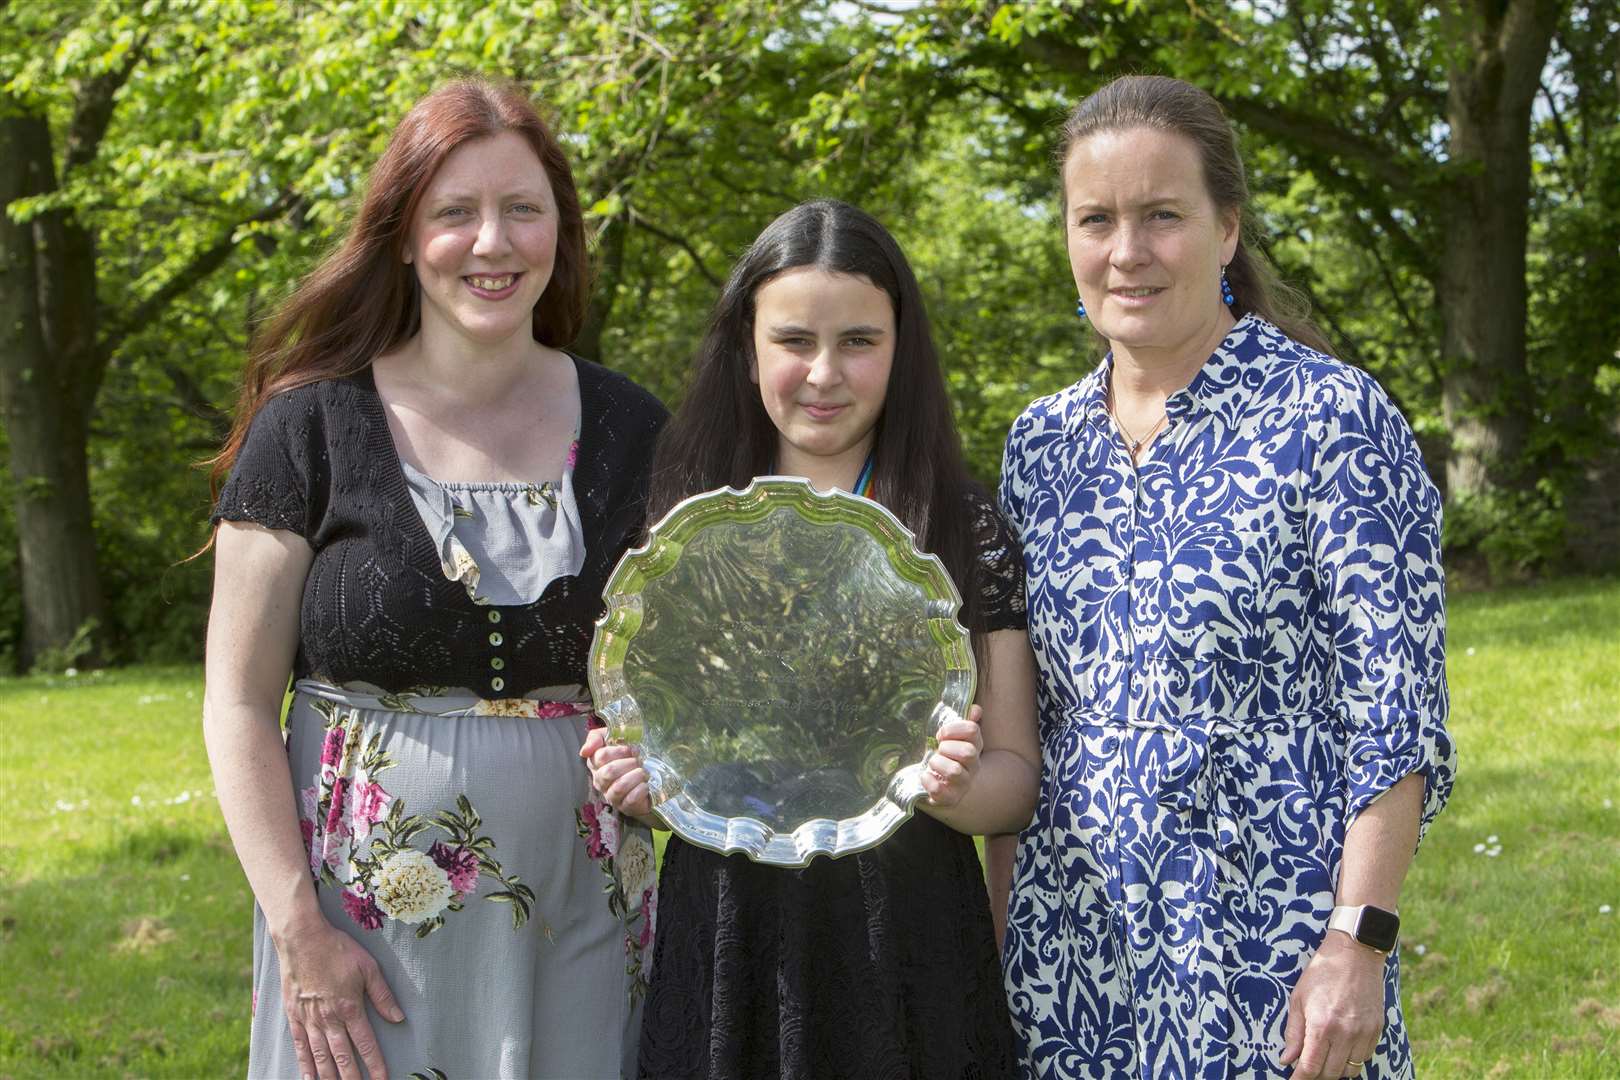 Rachel McBoyle, along with mother and daughter Elizabeth Jones-Singh and Olivia Singh, won the Margaret Henderson Memorial Trophy for chamber music. Elizabeth and Olivia also received the Wick Junior Scroll for chamber music level four. Picture: Robert MacDonald / Northern Studios